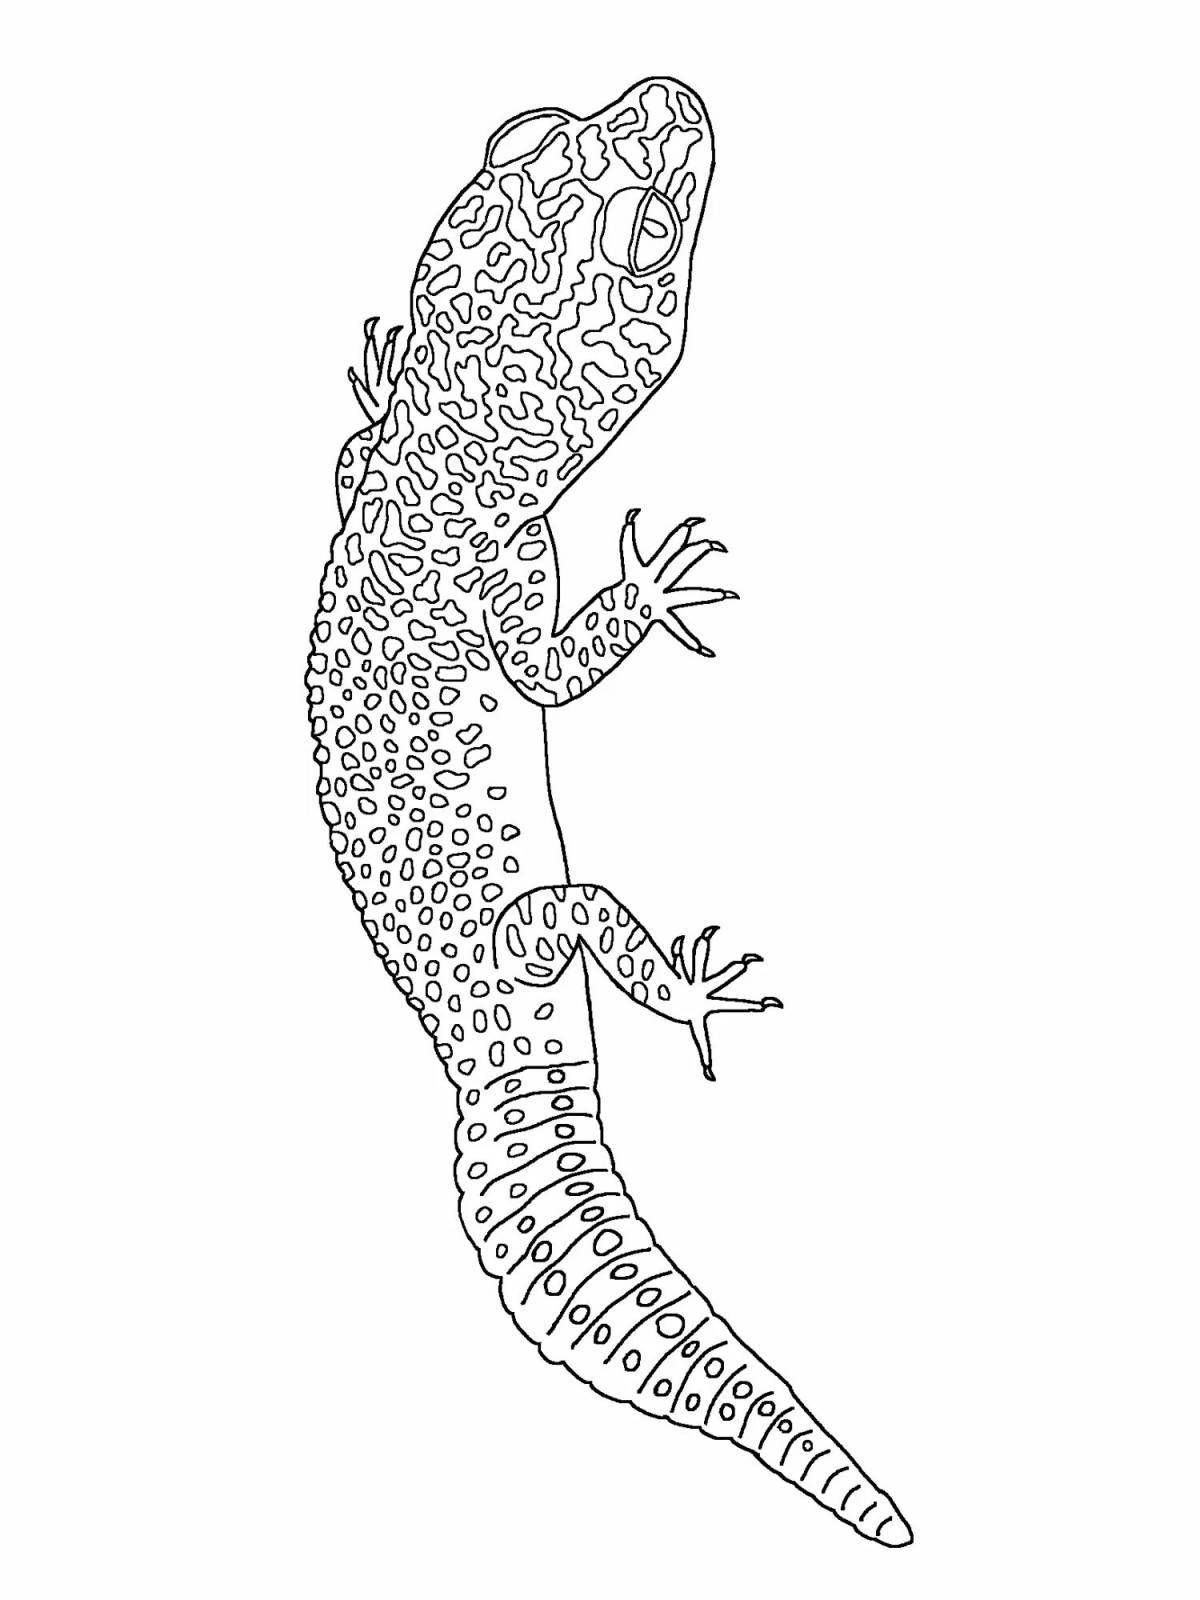 Coloring page funny gecko